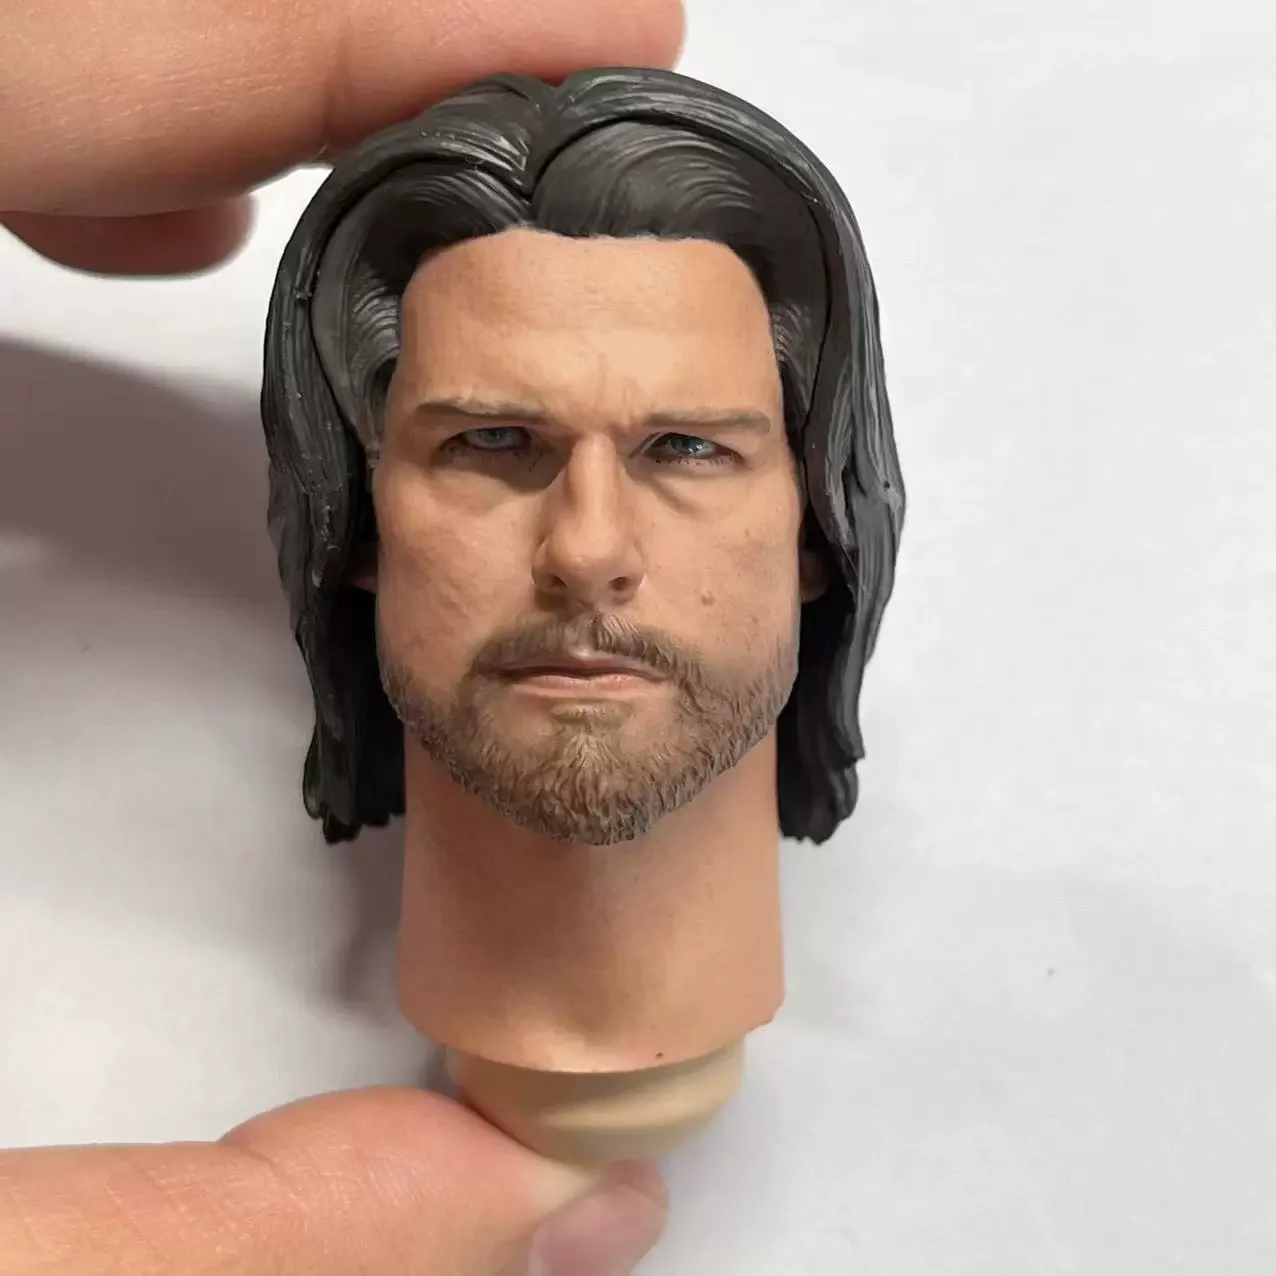 

Tom Cruise Samurai Male Head Carving Actor Movie Delicate Painted Model 1/6 Scale For 12" Action Figure Soldier Body Toys